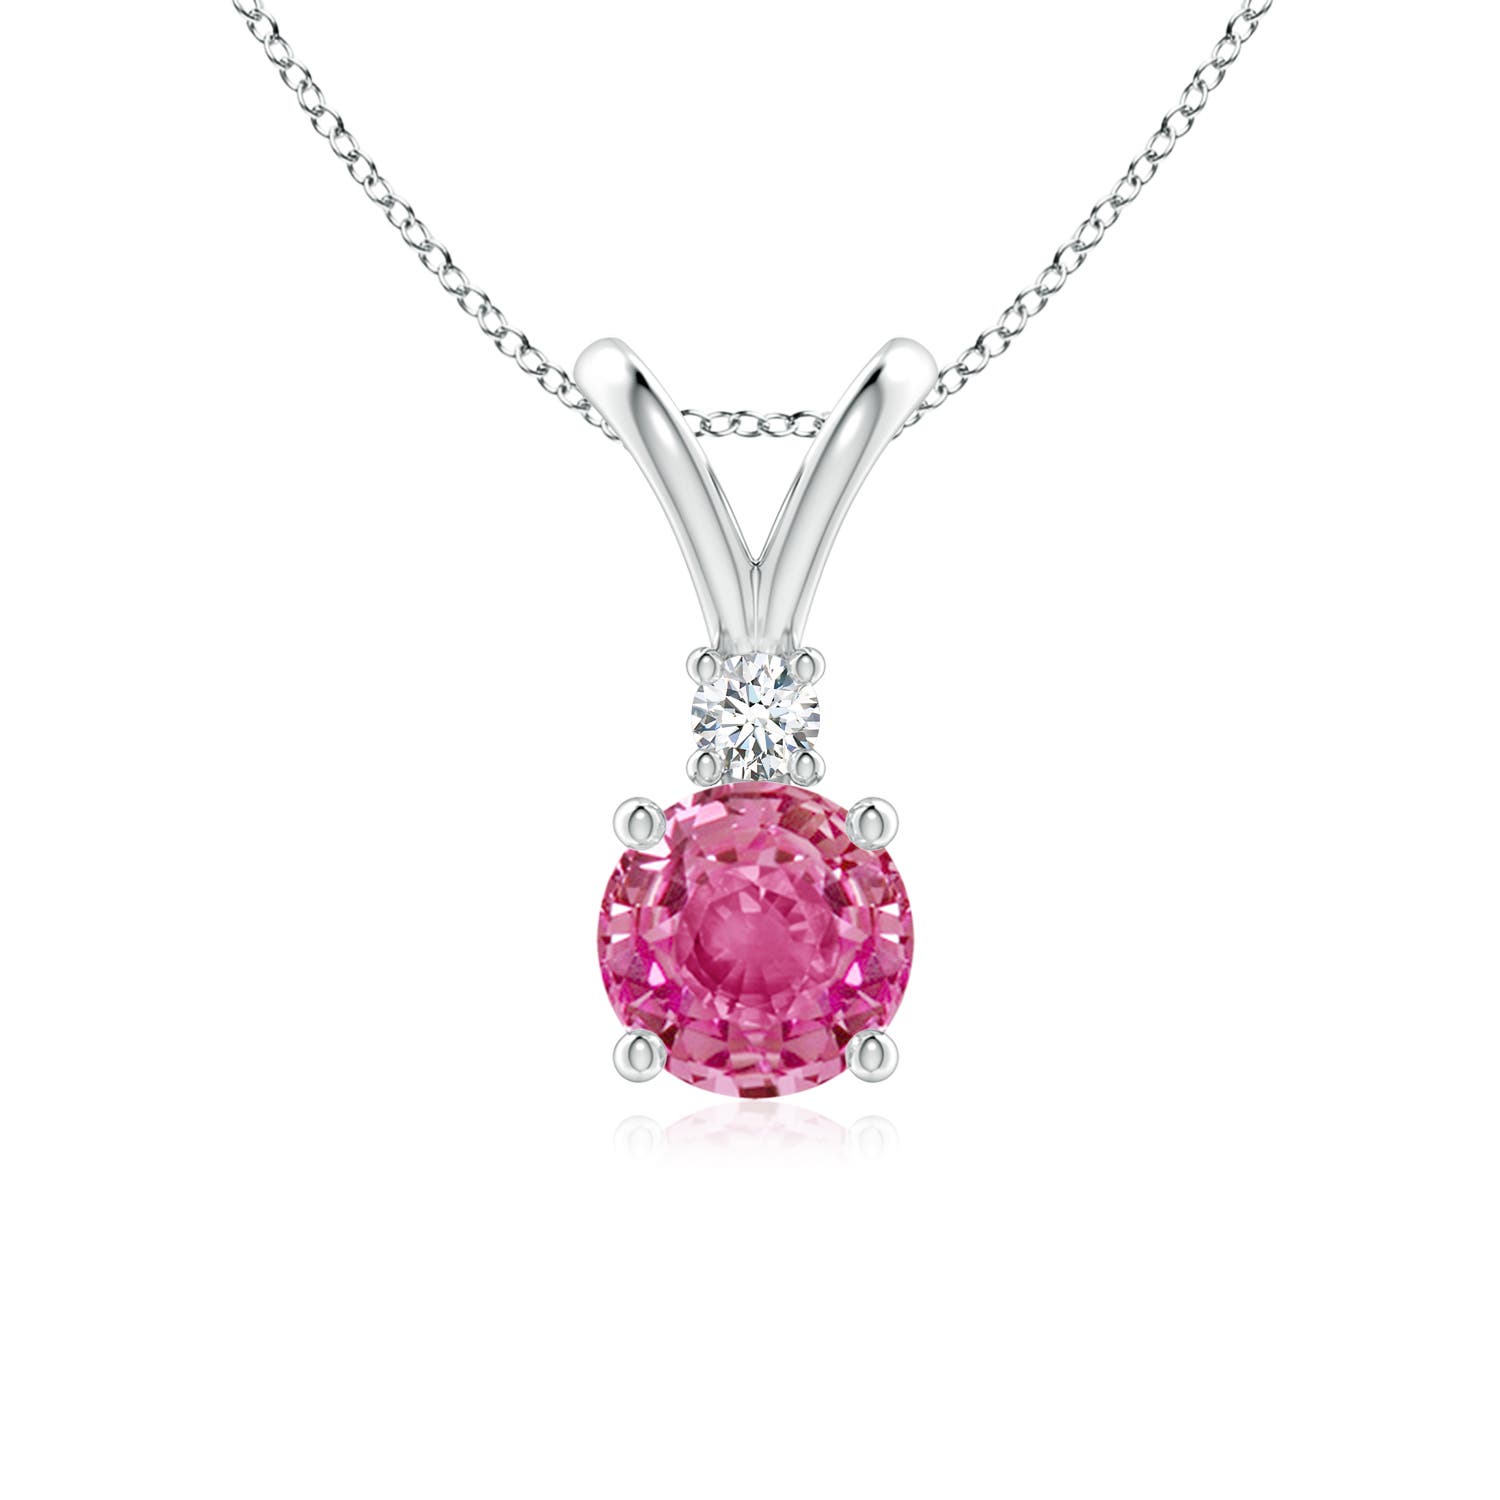 AAA - Pink Sapphire / 1.04 CT / 14 KT White Gold